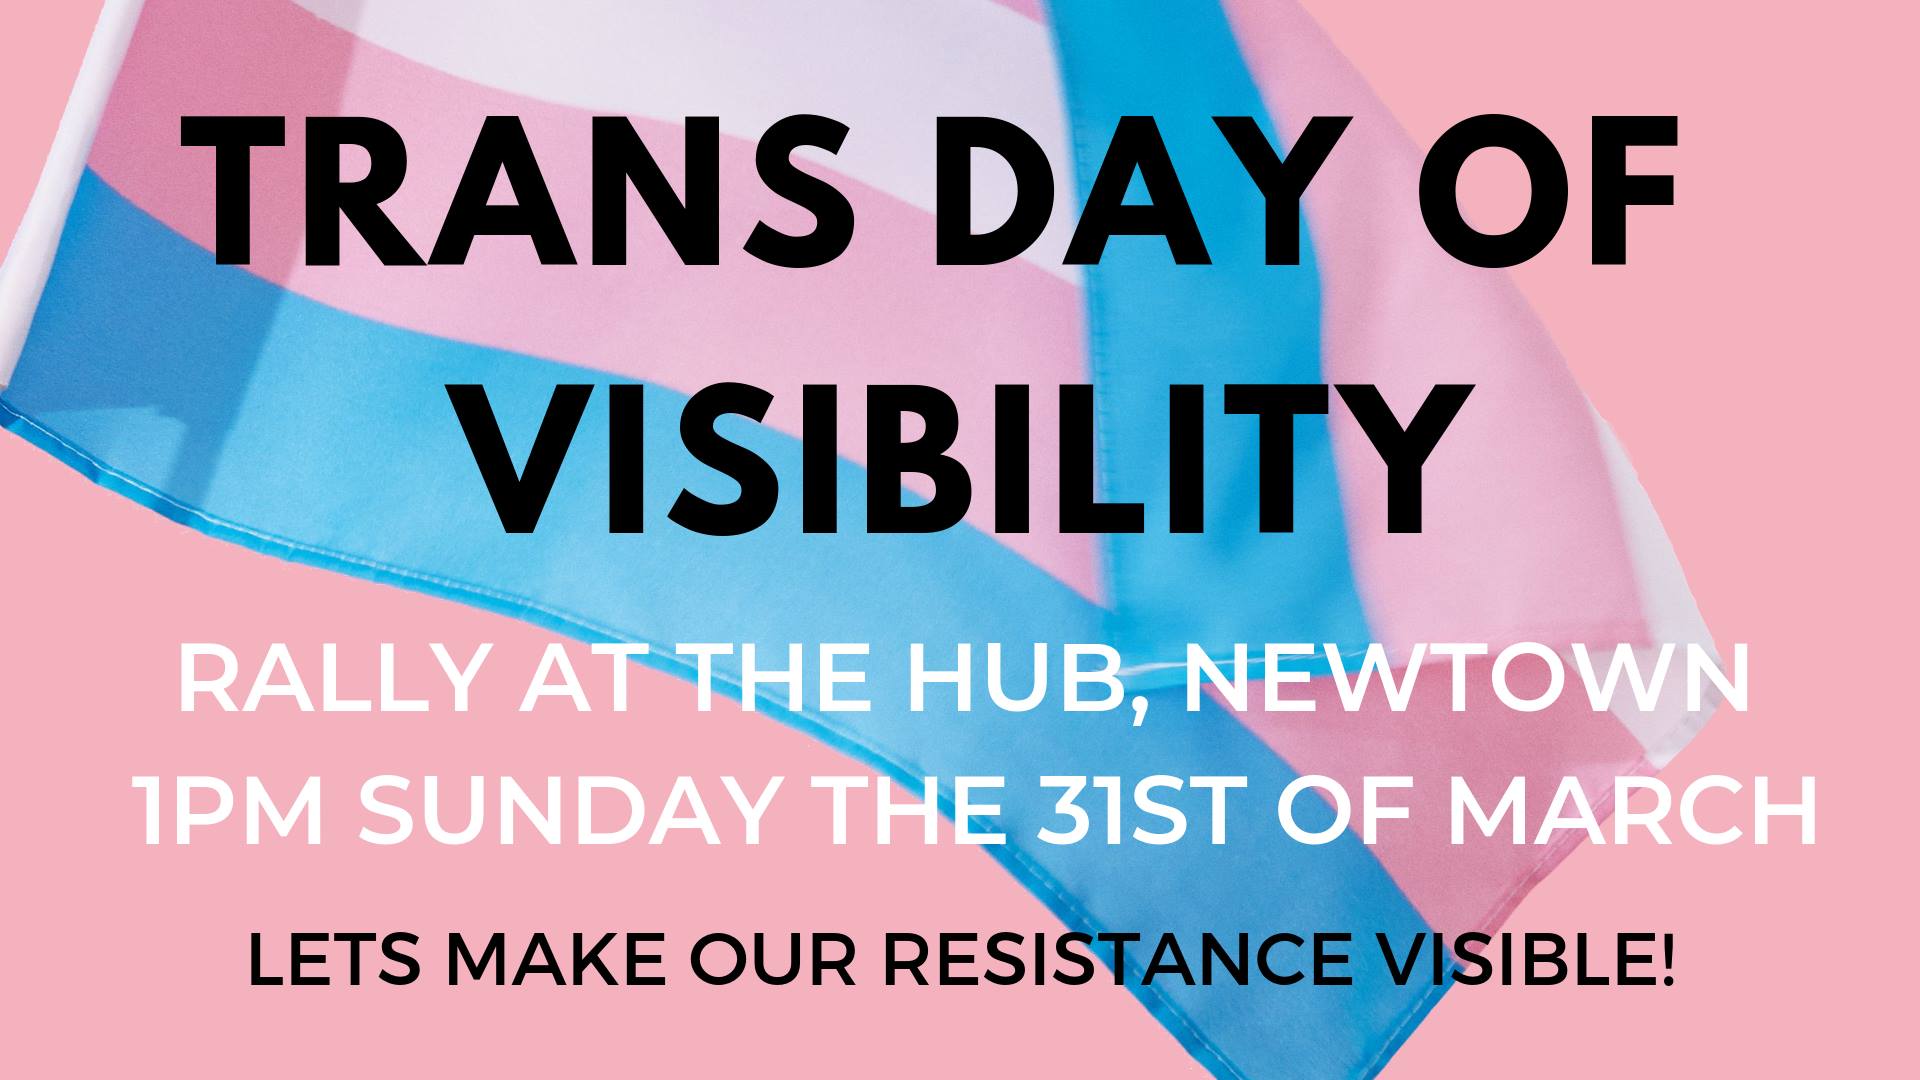 Rallying for the Trans Day of Visibility: An Interview With Trans